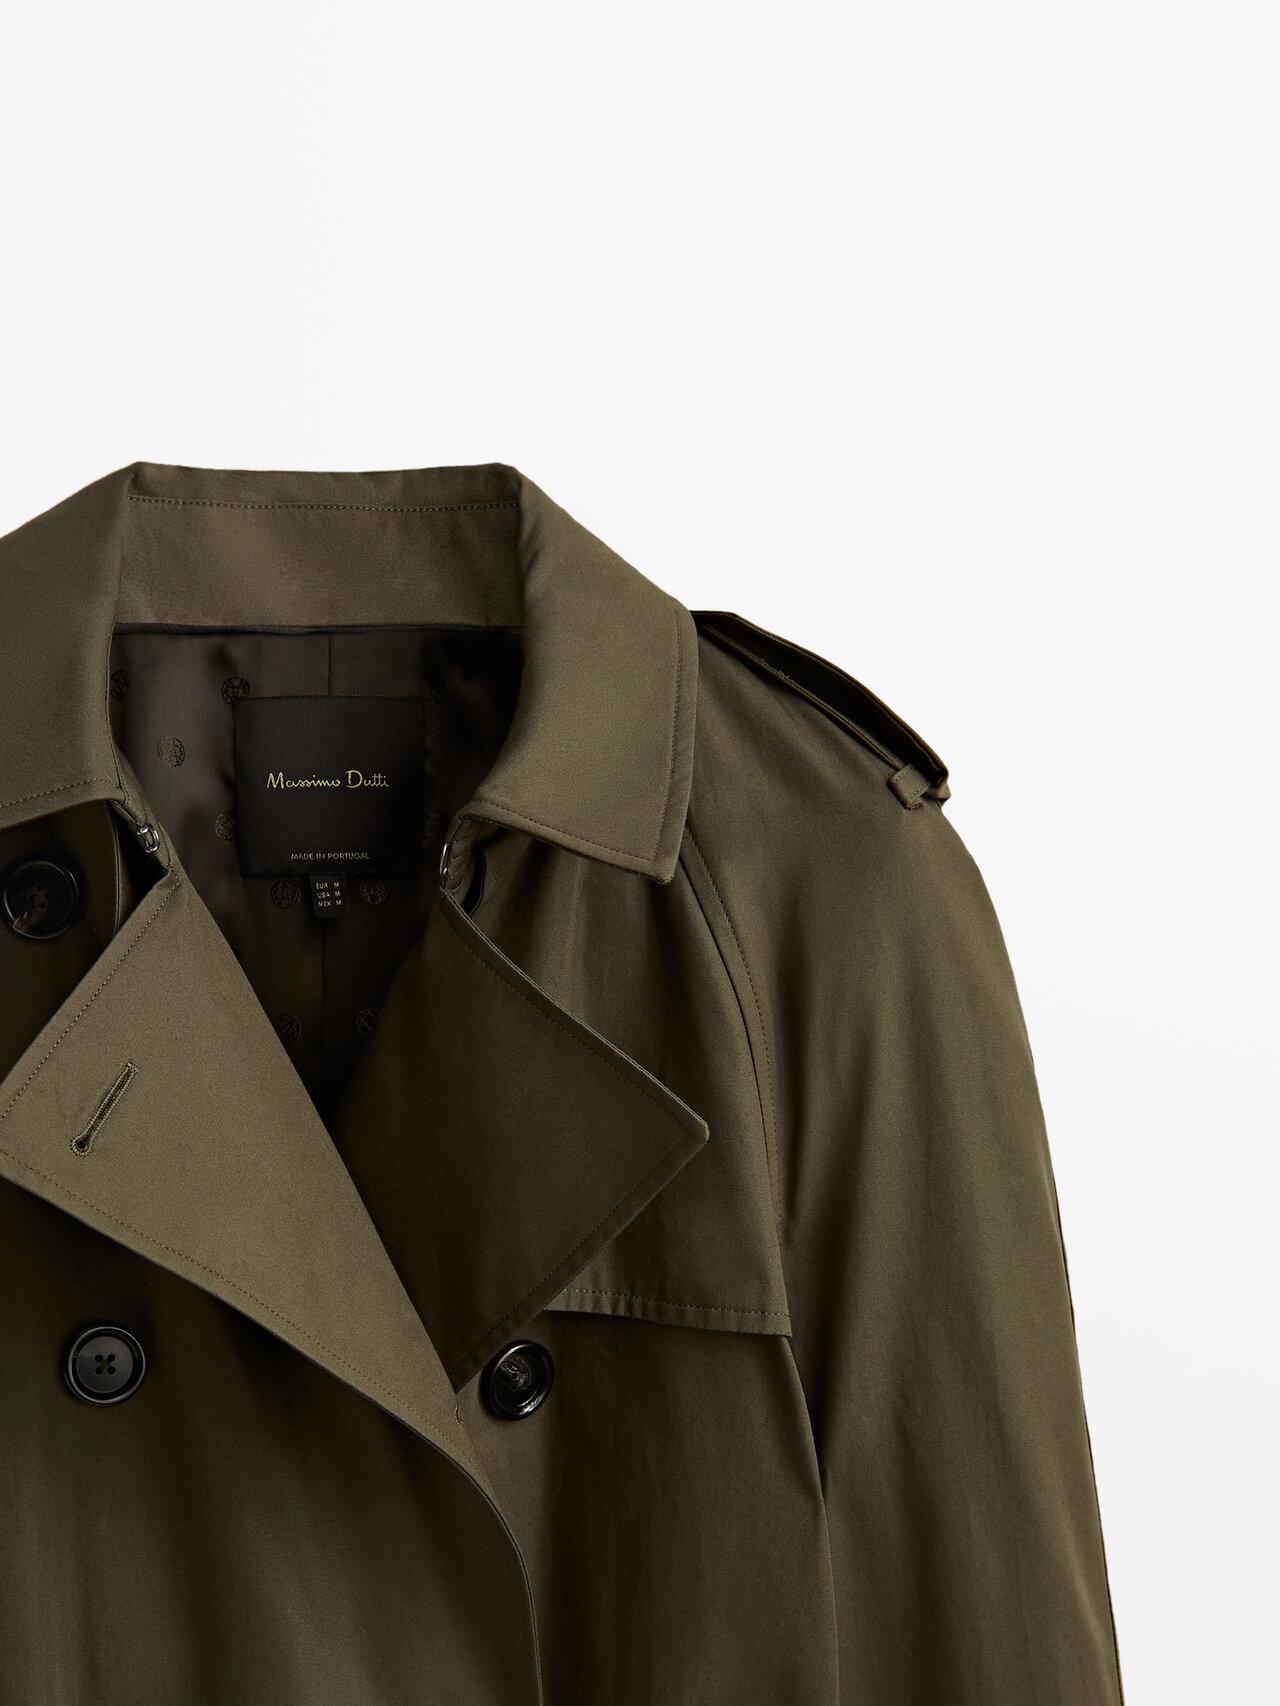 MASSIMO DUTTI Trench Coat With Belt in Green | Lyst